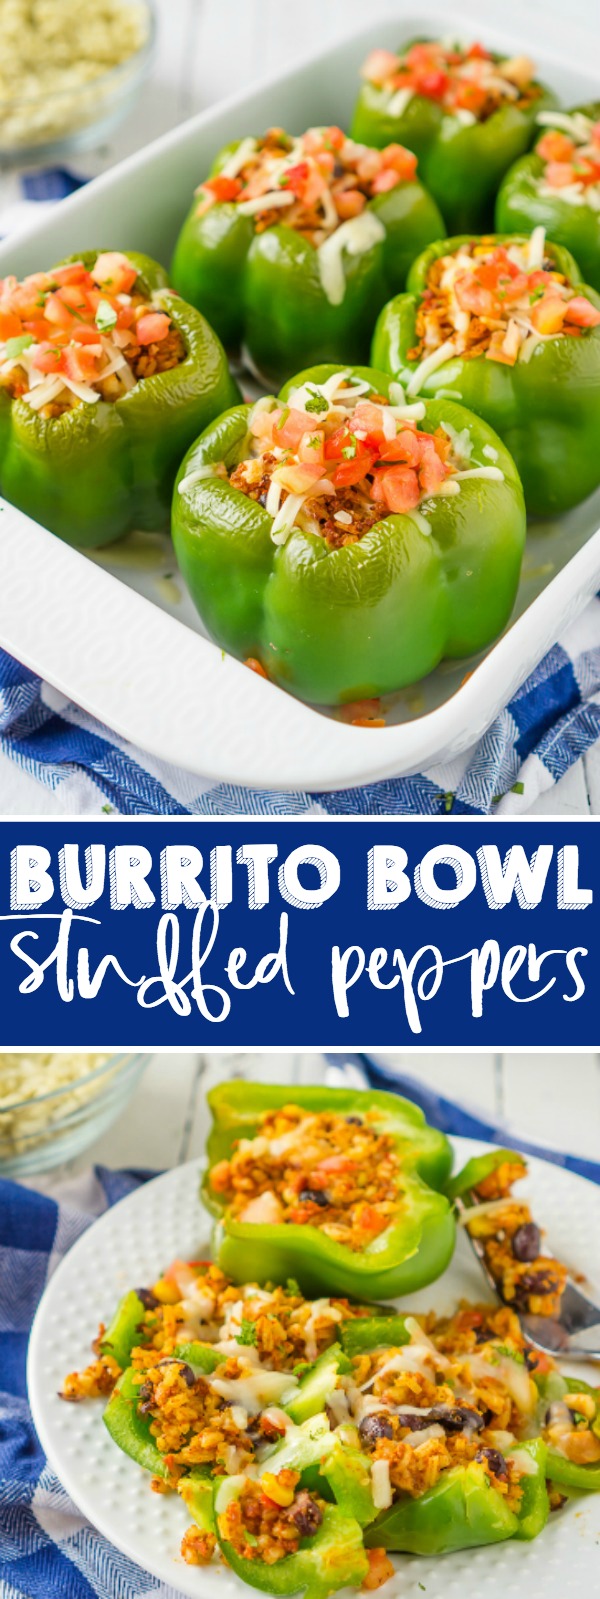 Love Chipotle but don’t always want to spend the money? Enter Burrito Bowl Stuffed Peppers! This stuffed pepper recipe is a chipotle inspired recipe that’s filled with delicious cilantro lime rice, spicy chorizo, corn, pico de gallo and more! They are filled to the brim with tasty ingredients! | THE LOVE NERDS